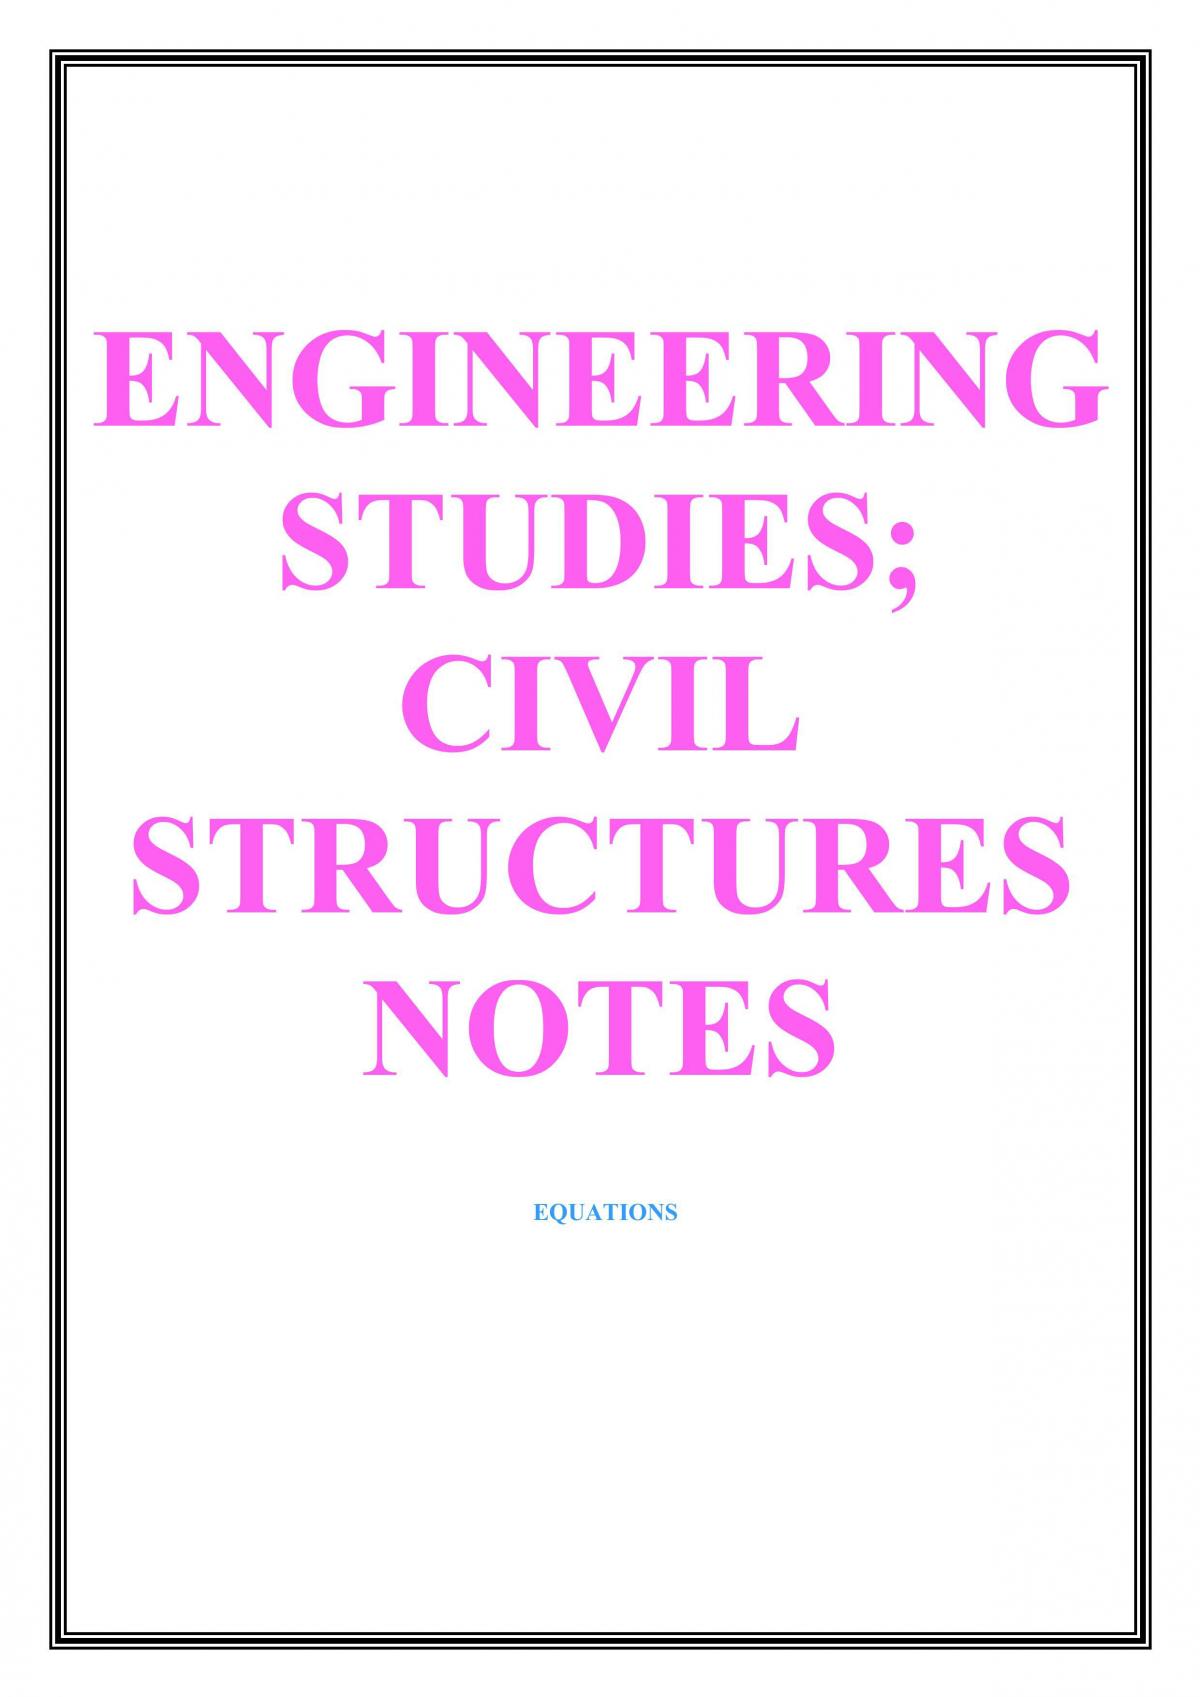 Civil Structures Engineering Year 12 Notes - Page 1